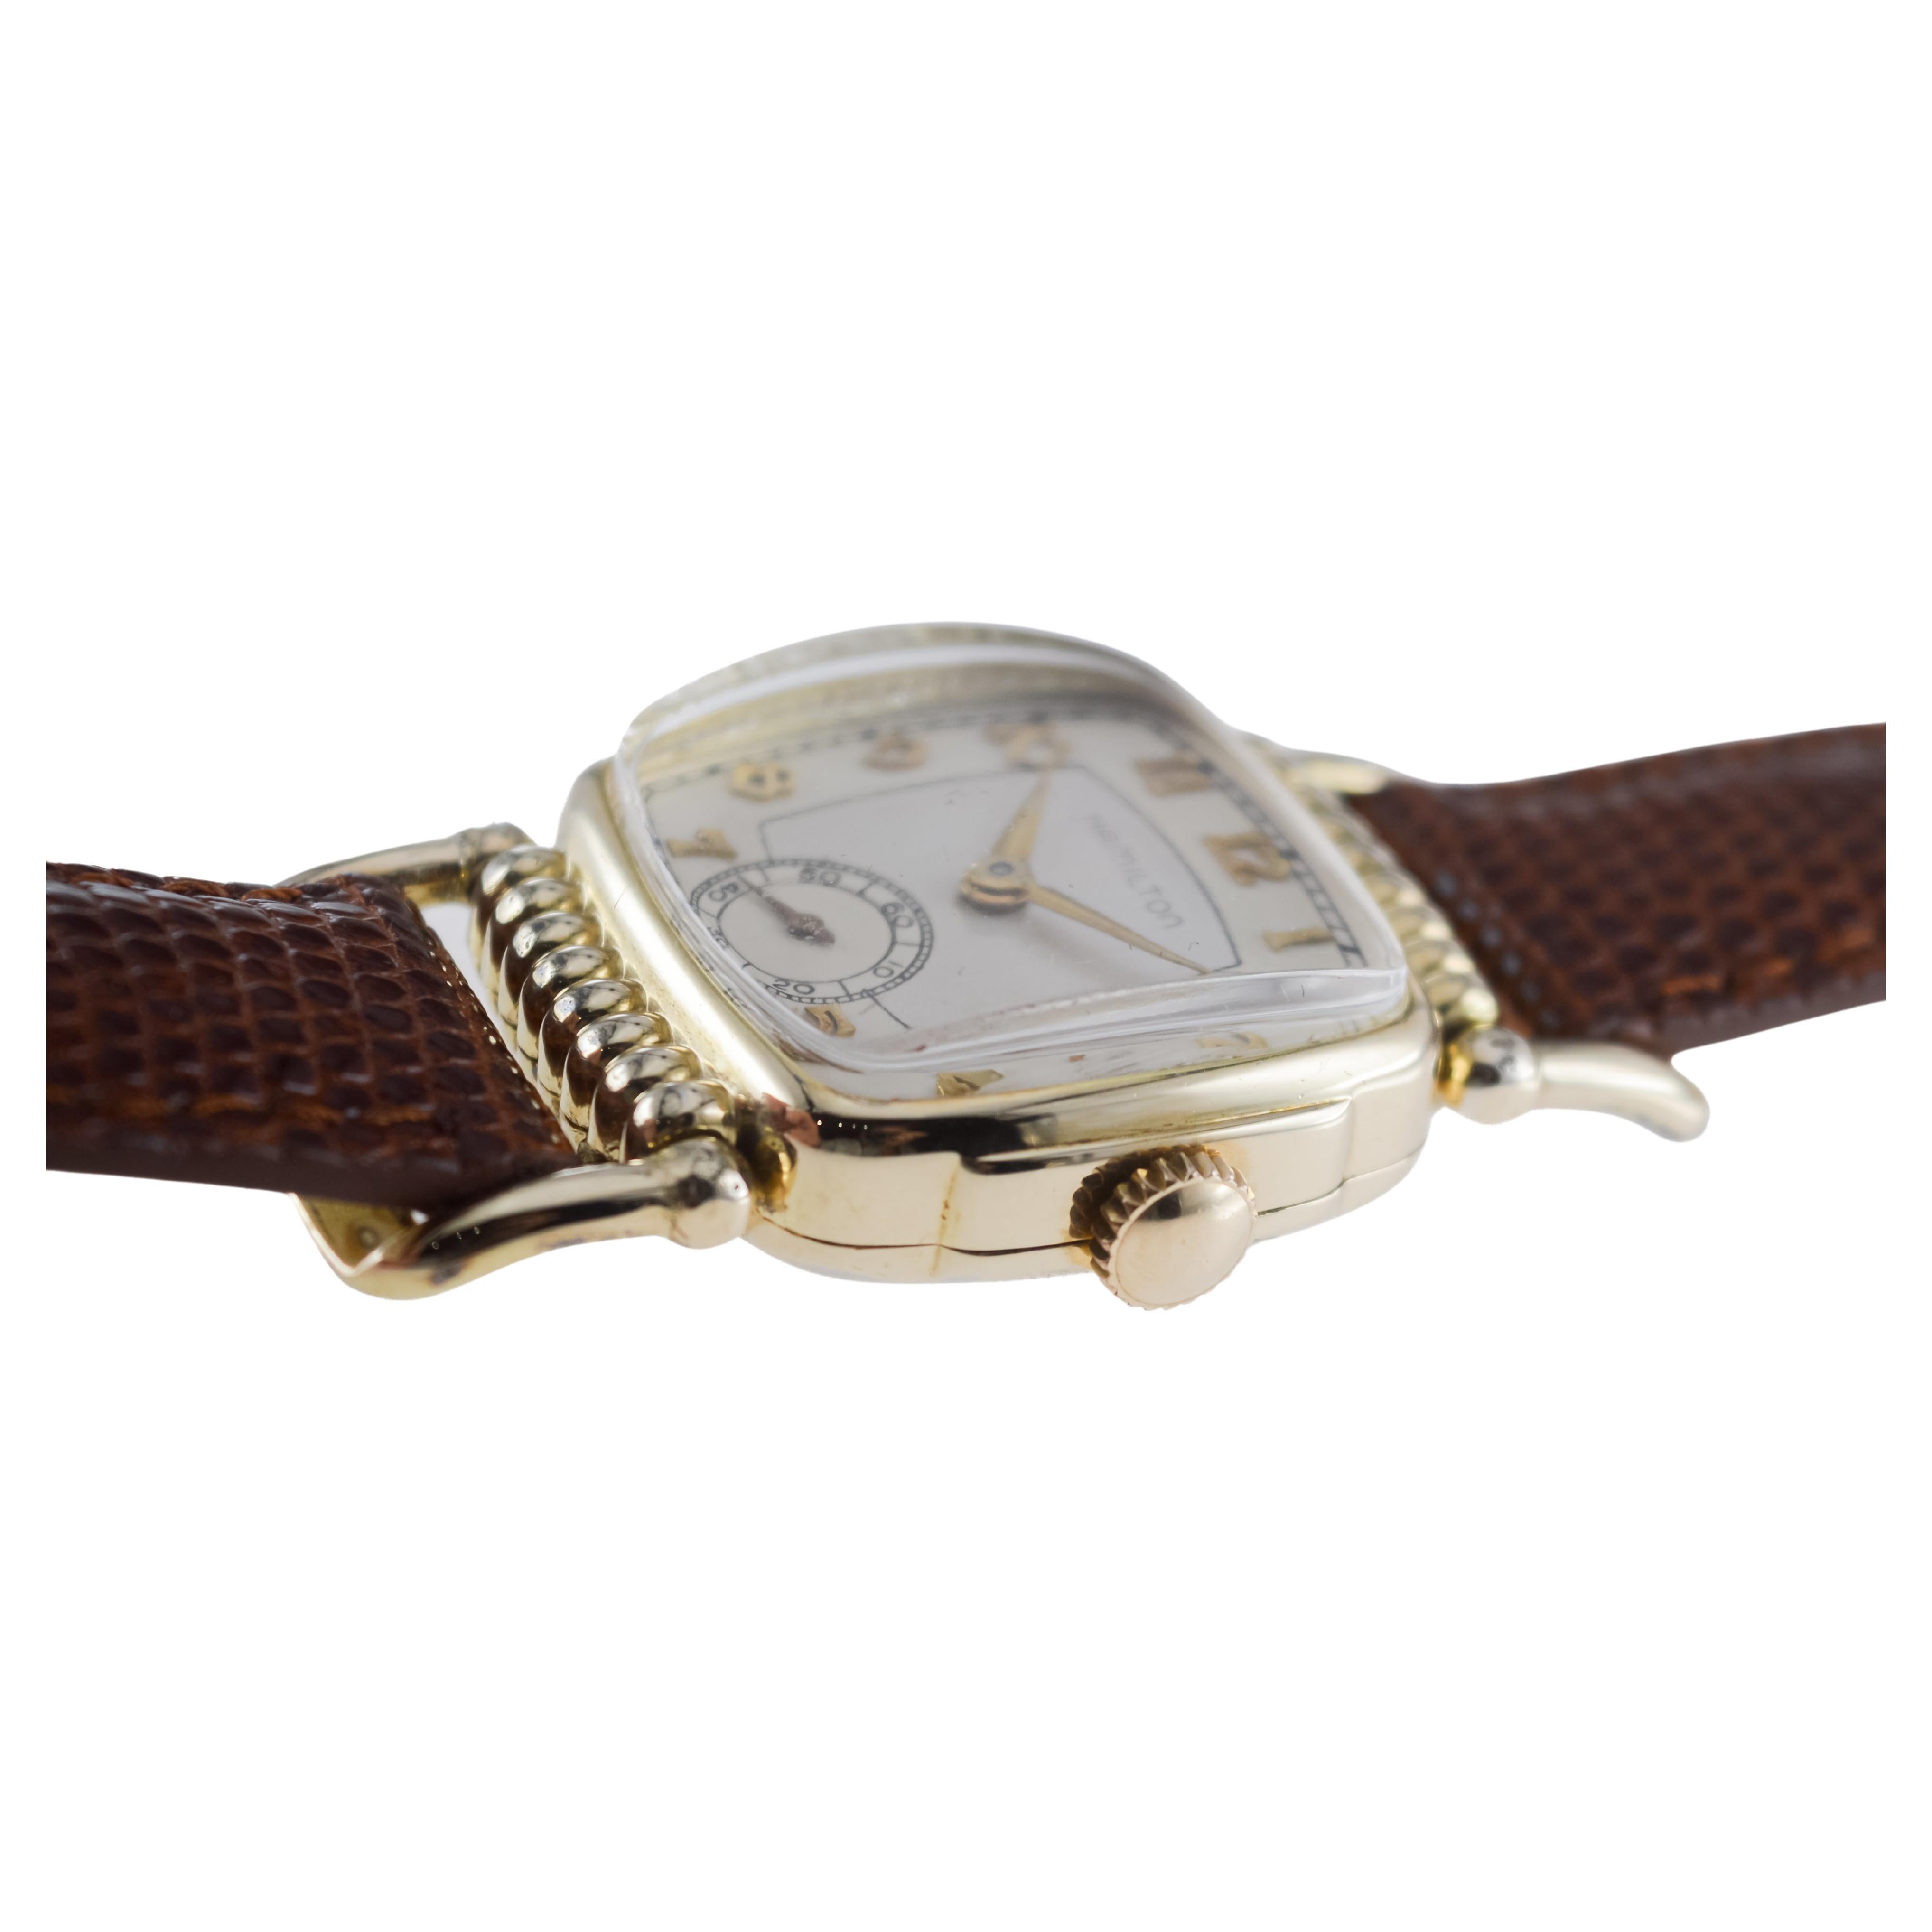 Hamilton Gold-Filled Art Deco Watch with Articulating Lugs 1940's For Sale 3